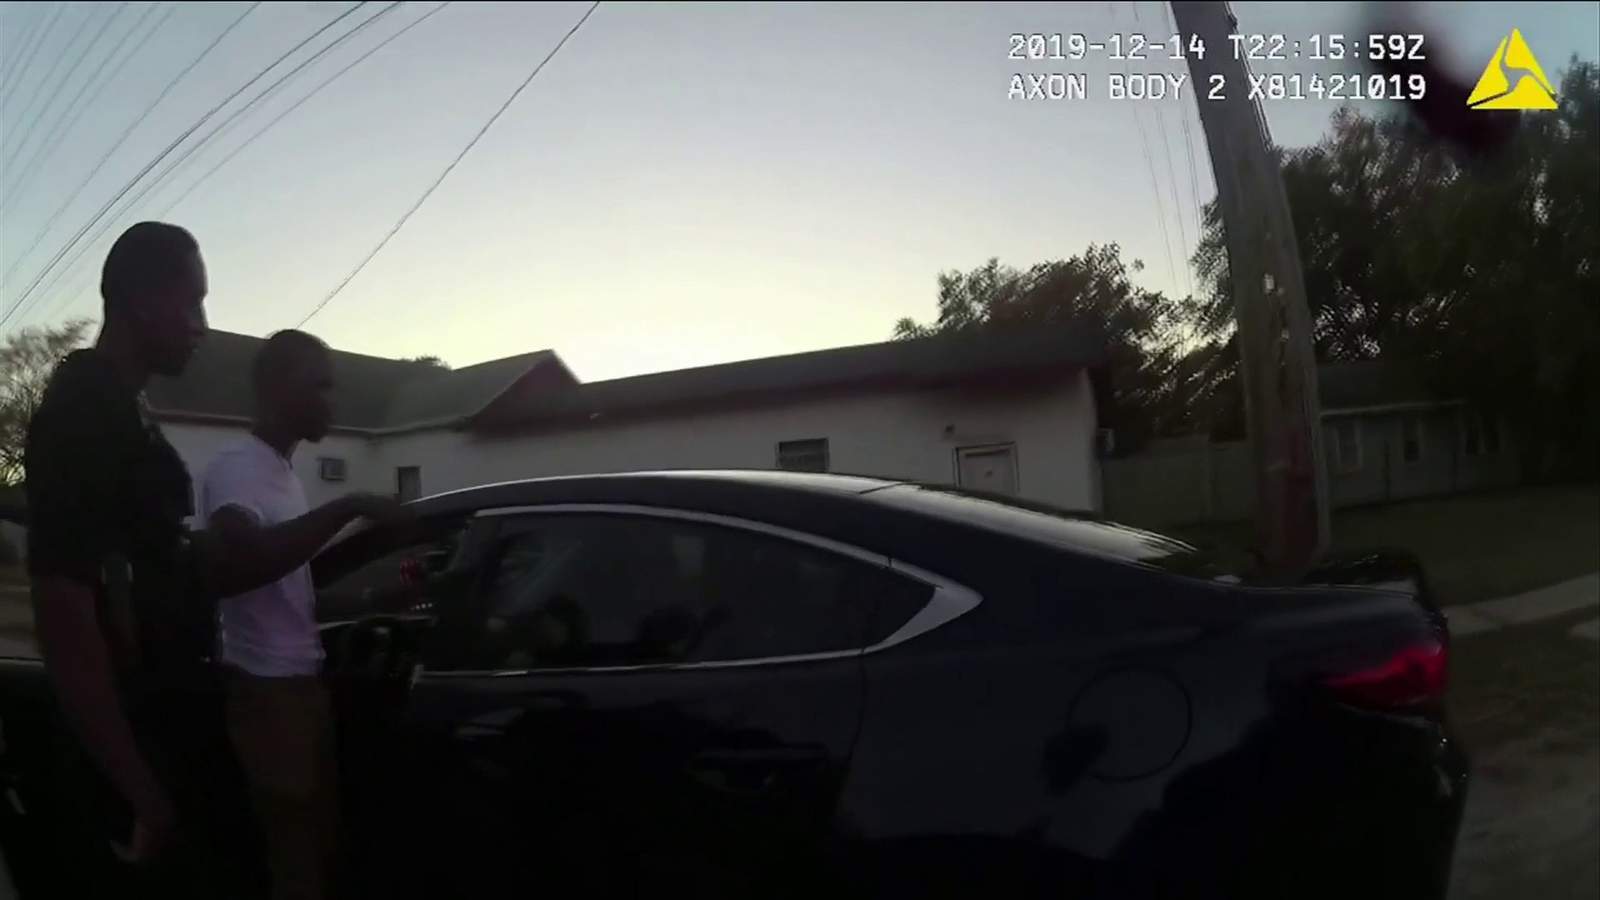 Jacksonville officer justified in 2019 deadly shooting of 22-year-old